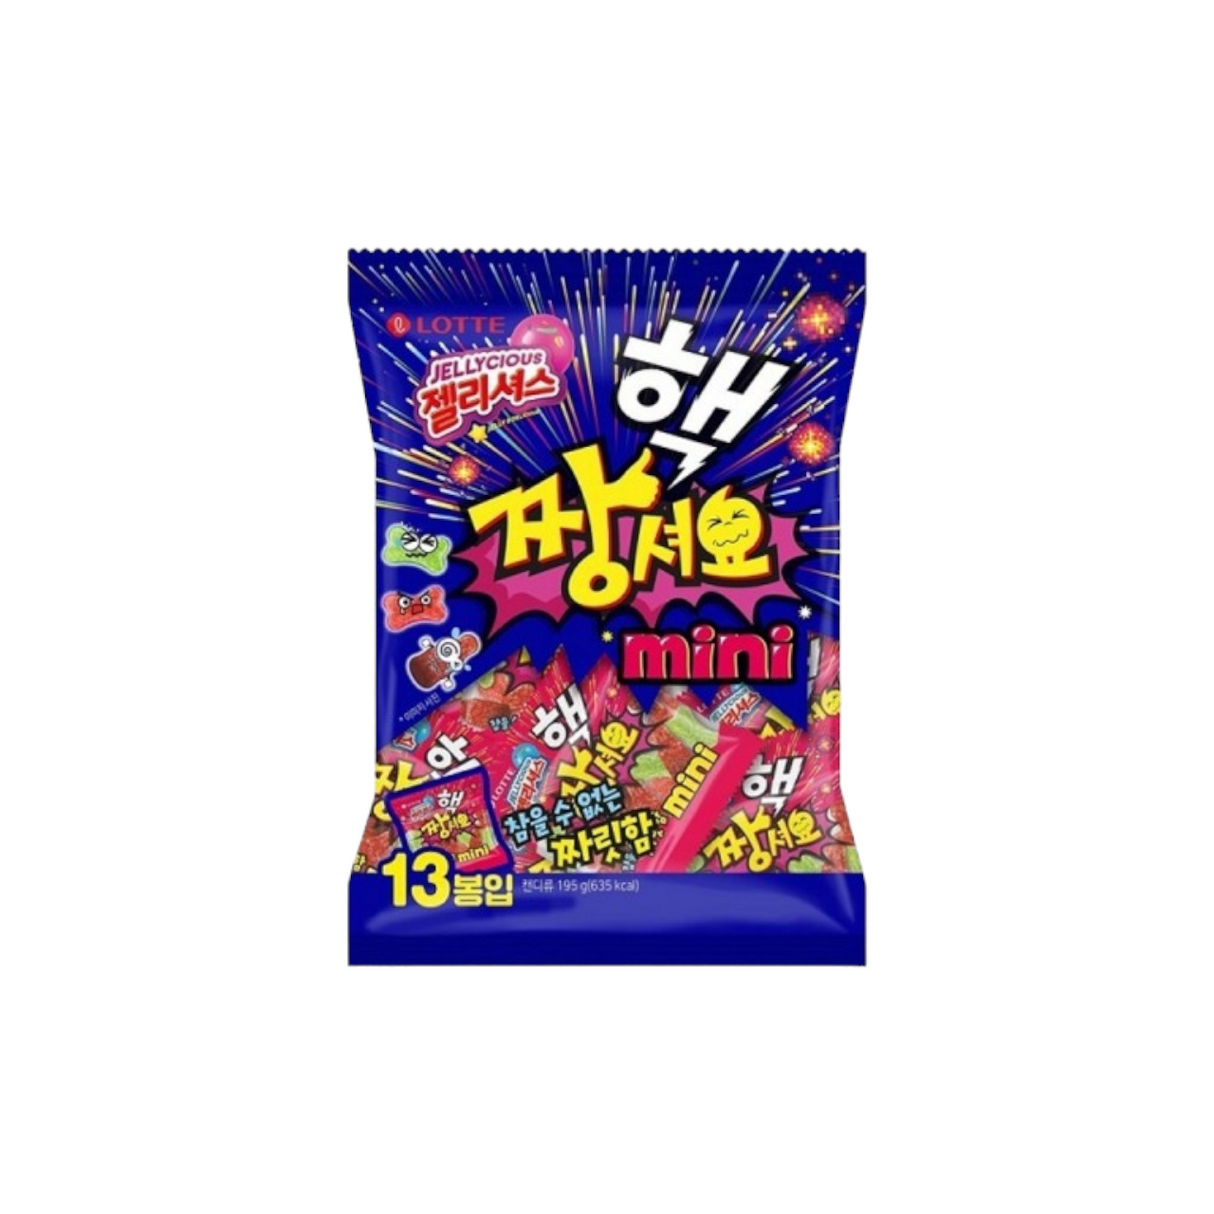 Lotte Jellycious Extremely Sour Cola (12x50G)